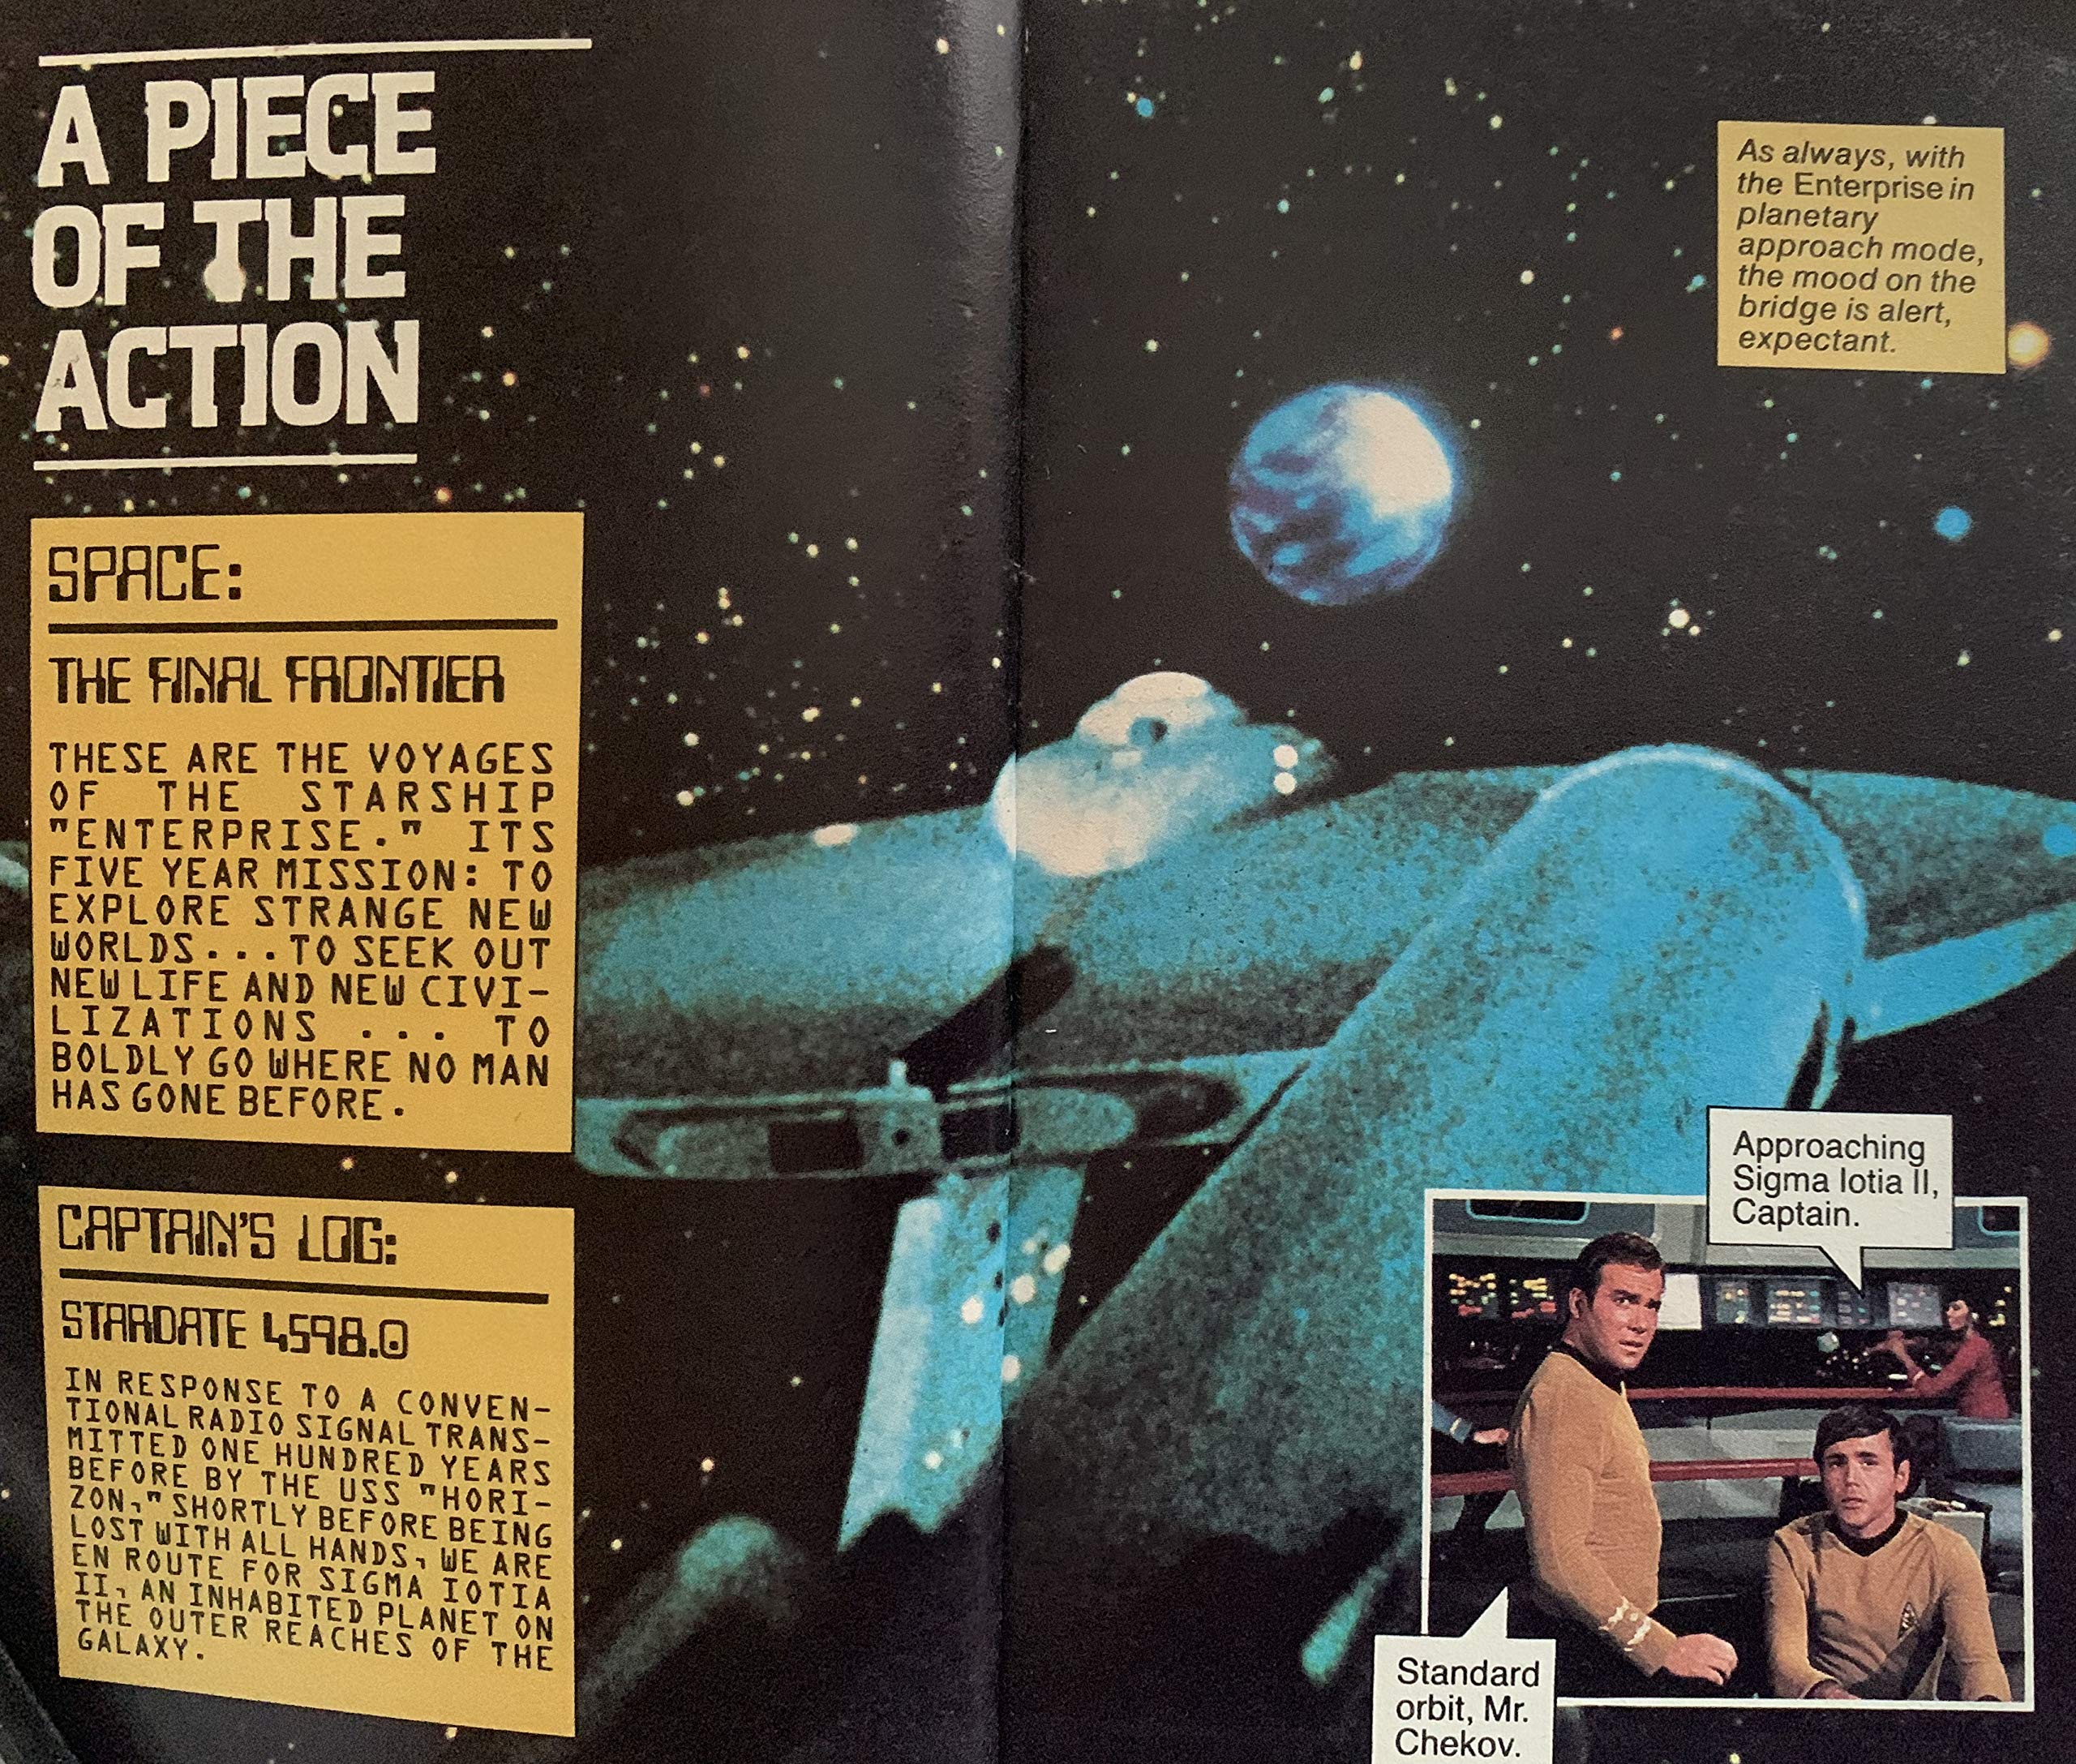 Fotonovel　Midas　Trek　Star　The　Vintage　Toys,　Paperback　No.　Touch　Of　Piece　1978　A　–　And　Action　Games　Collectables